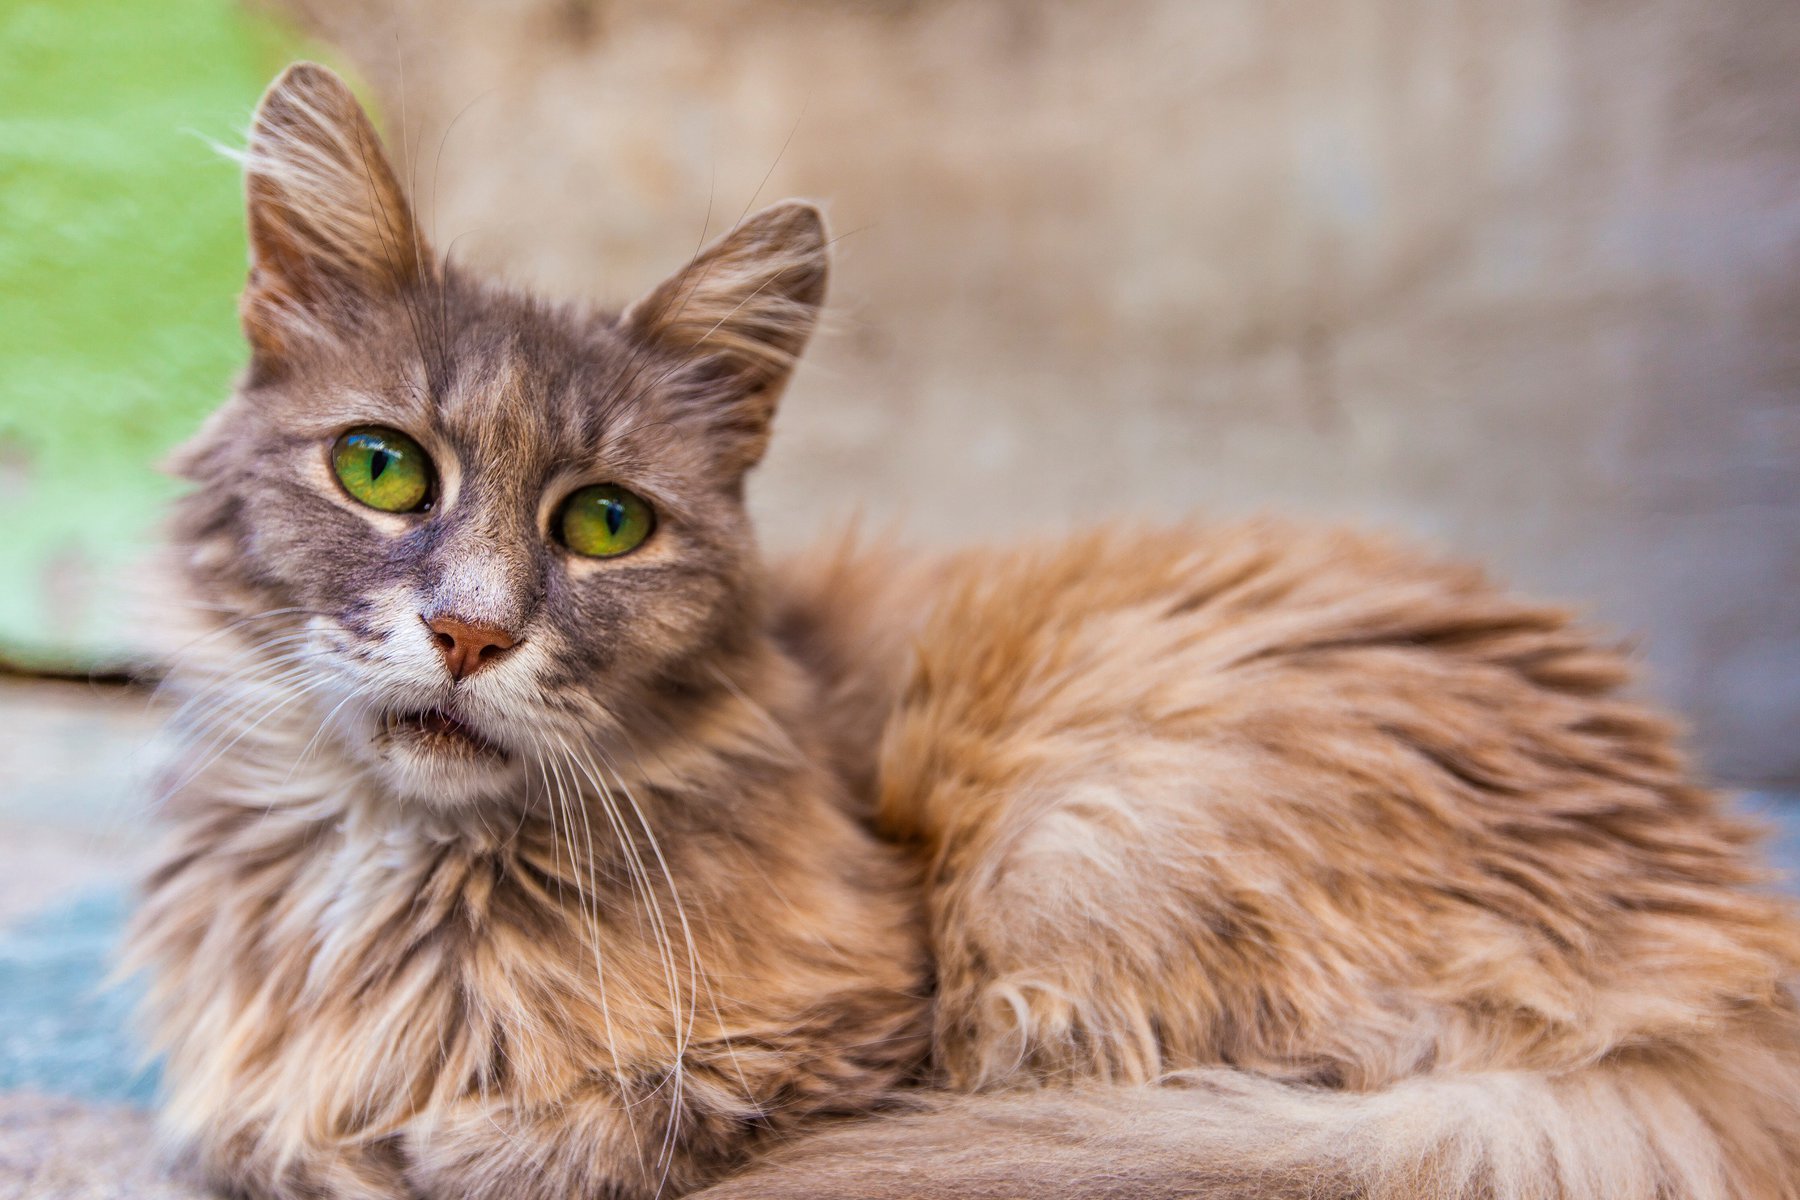 pretty long haired senior cat with green eyes, illustrating the topic "feeding the senior cat"